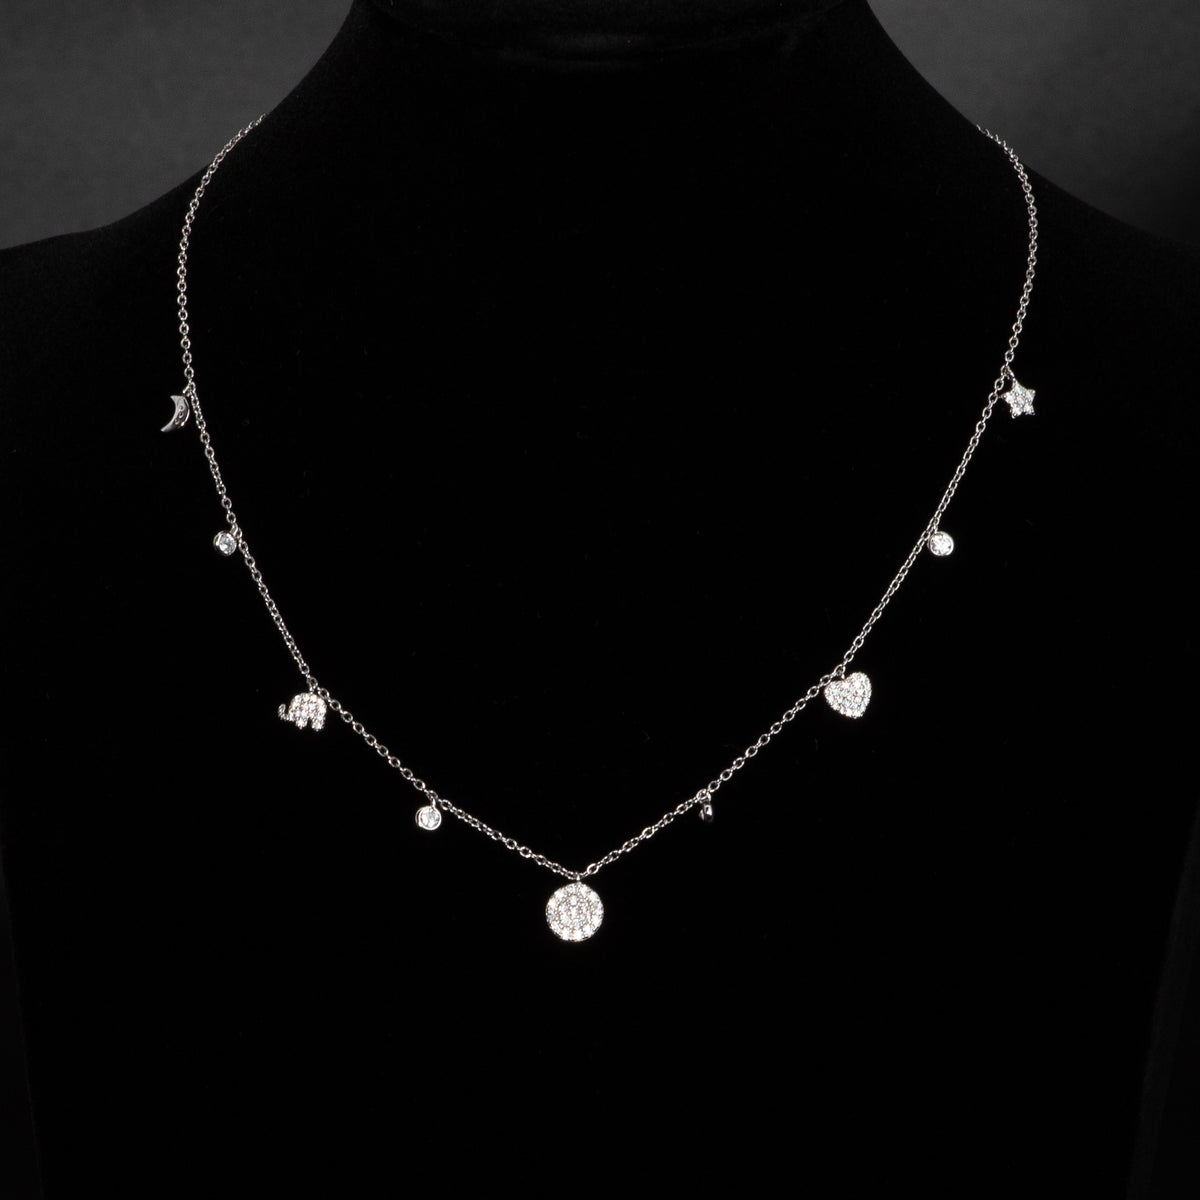 Lusso Silver Amuleto Necklace